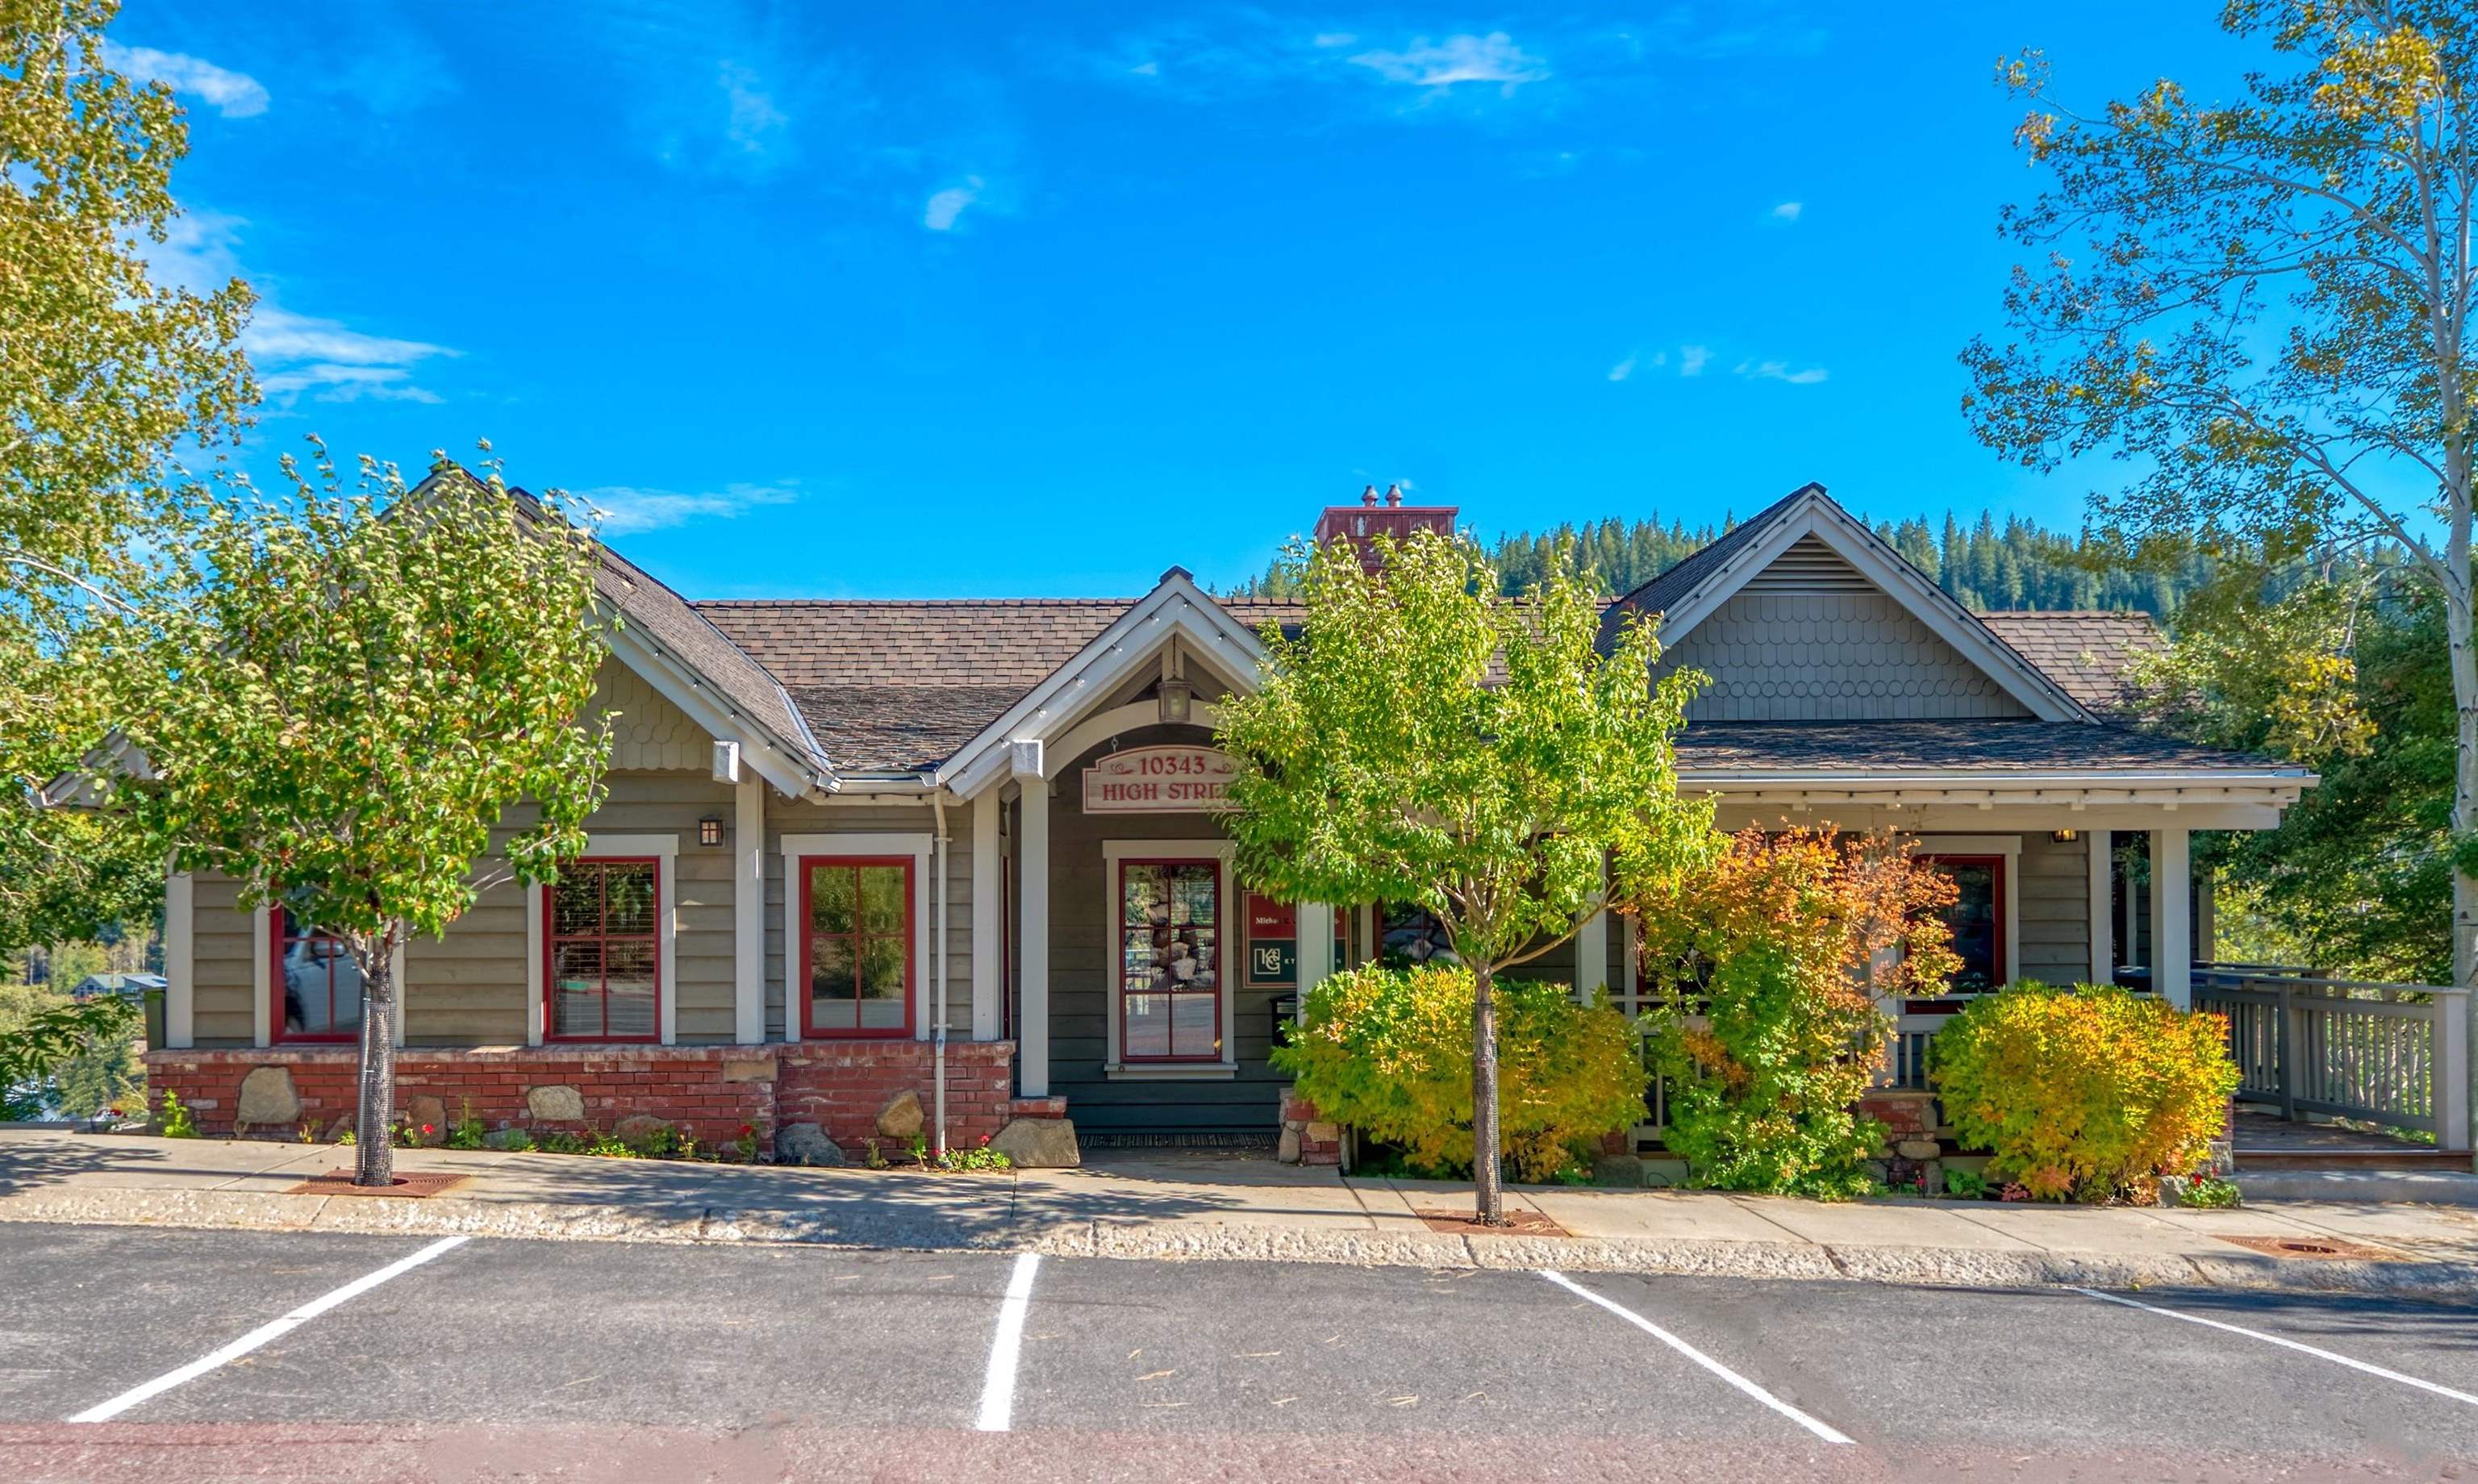 Image for 10343 High Street, Truckee, CA 96161